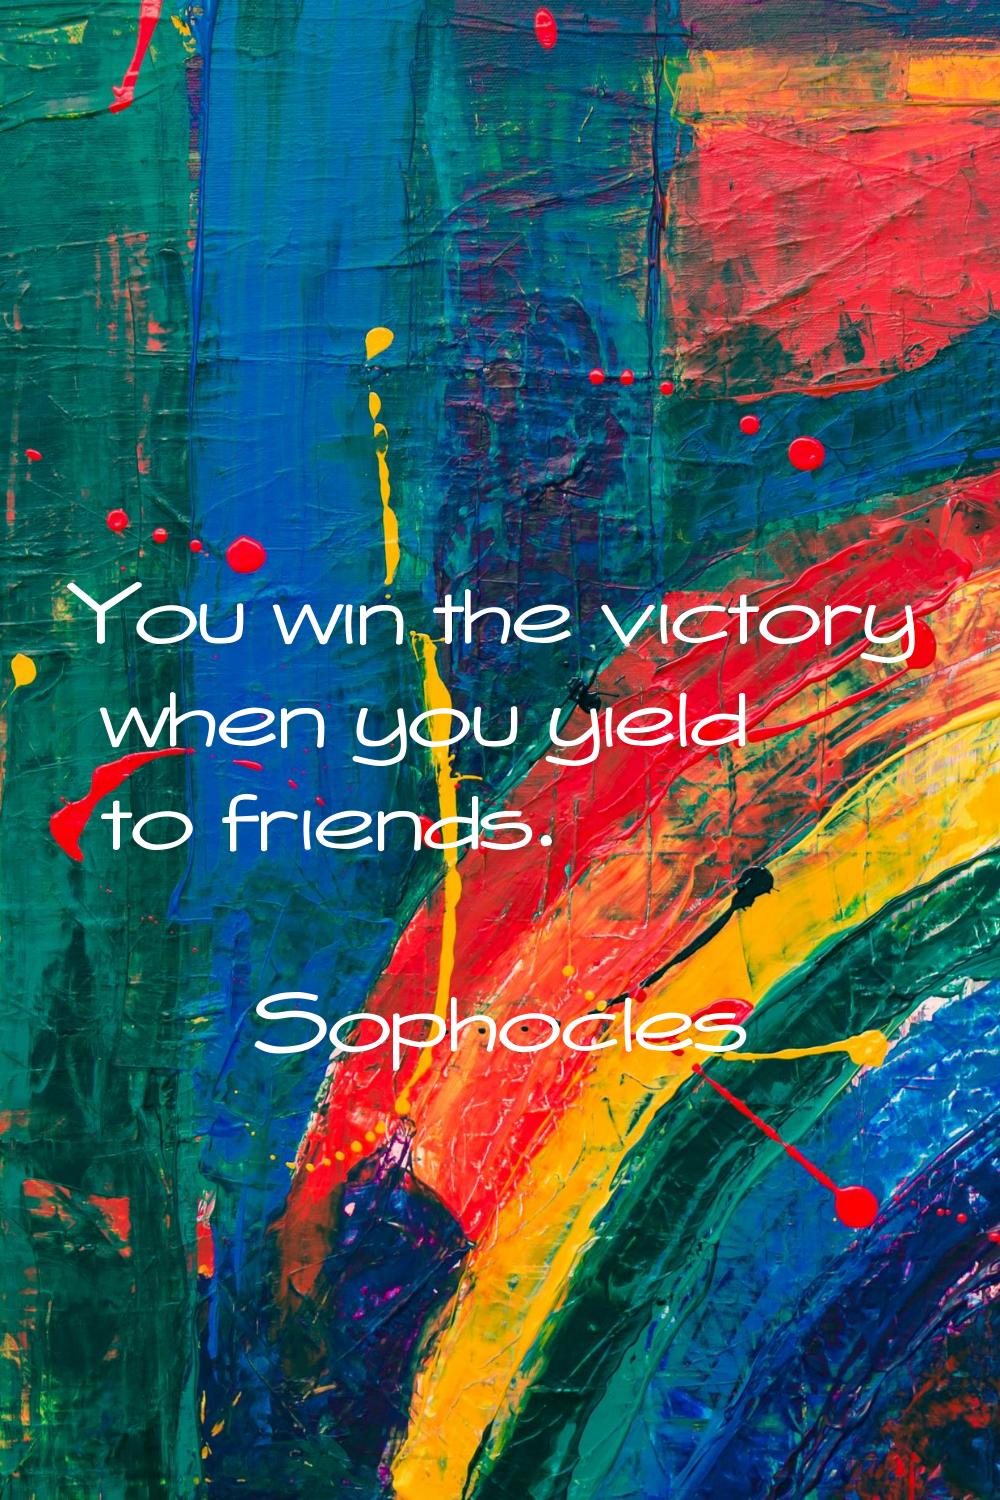 You win the victory when you yield to friends.